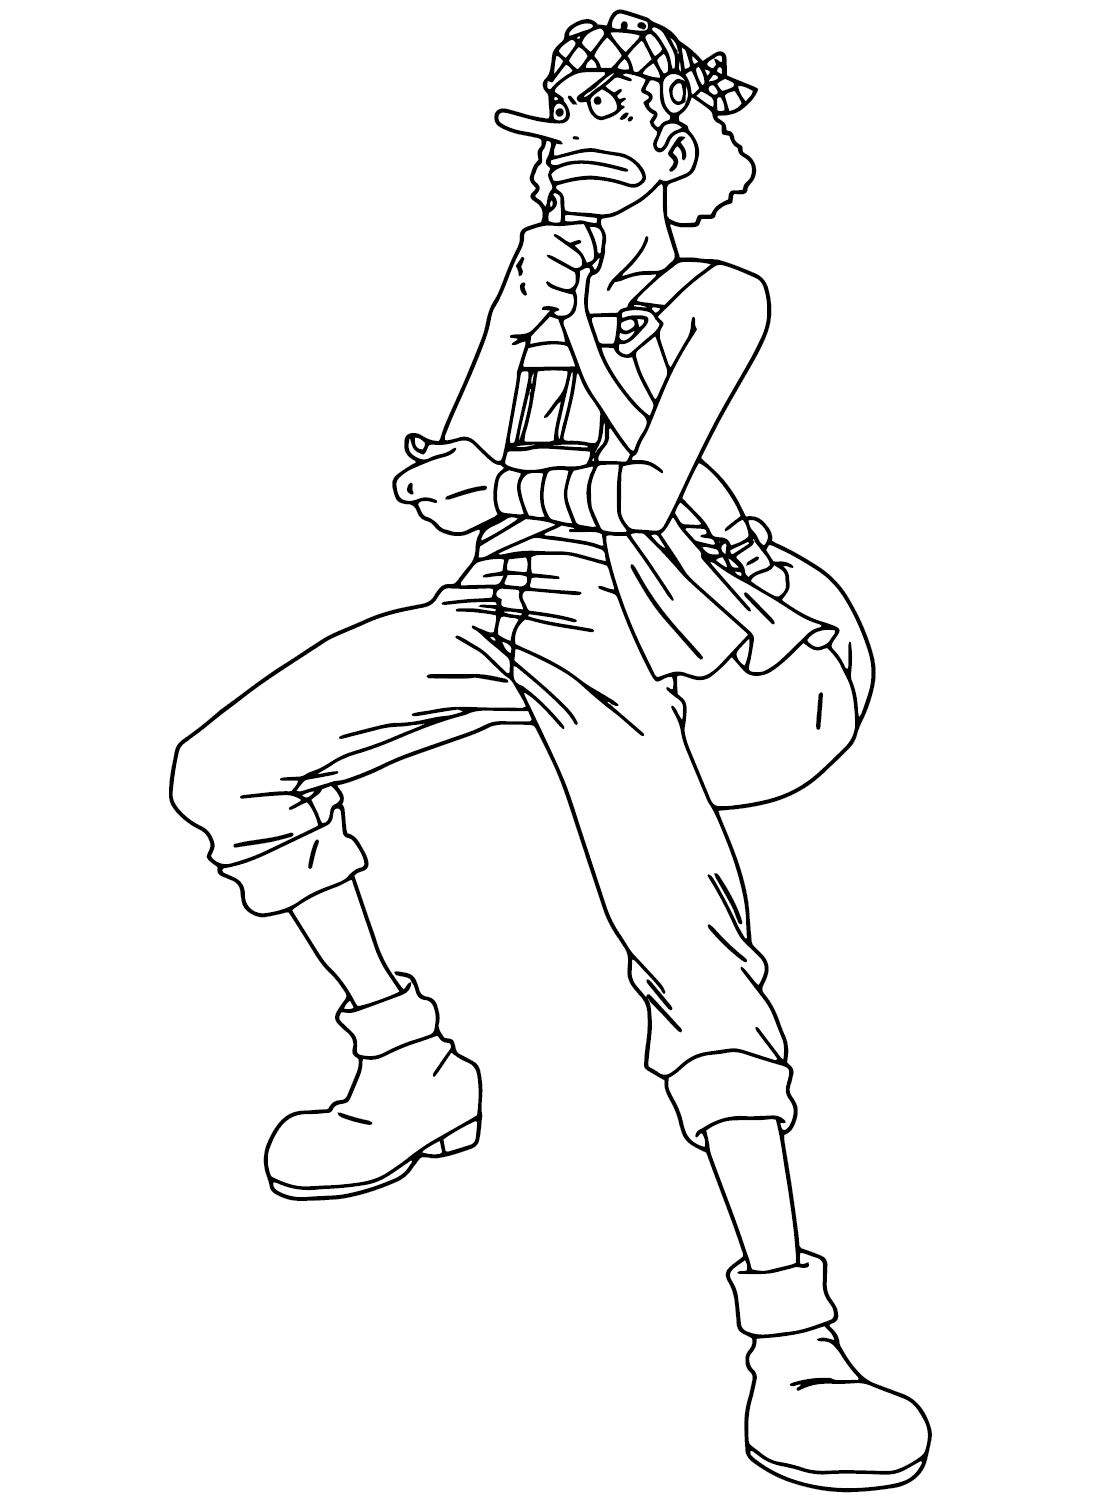 Usopp Coloring Page to Print